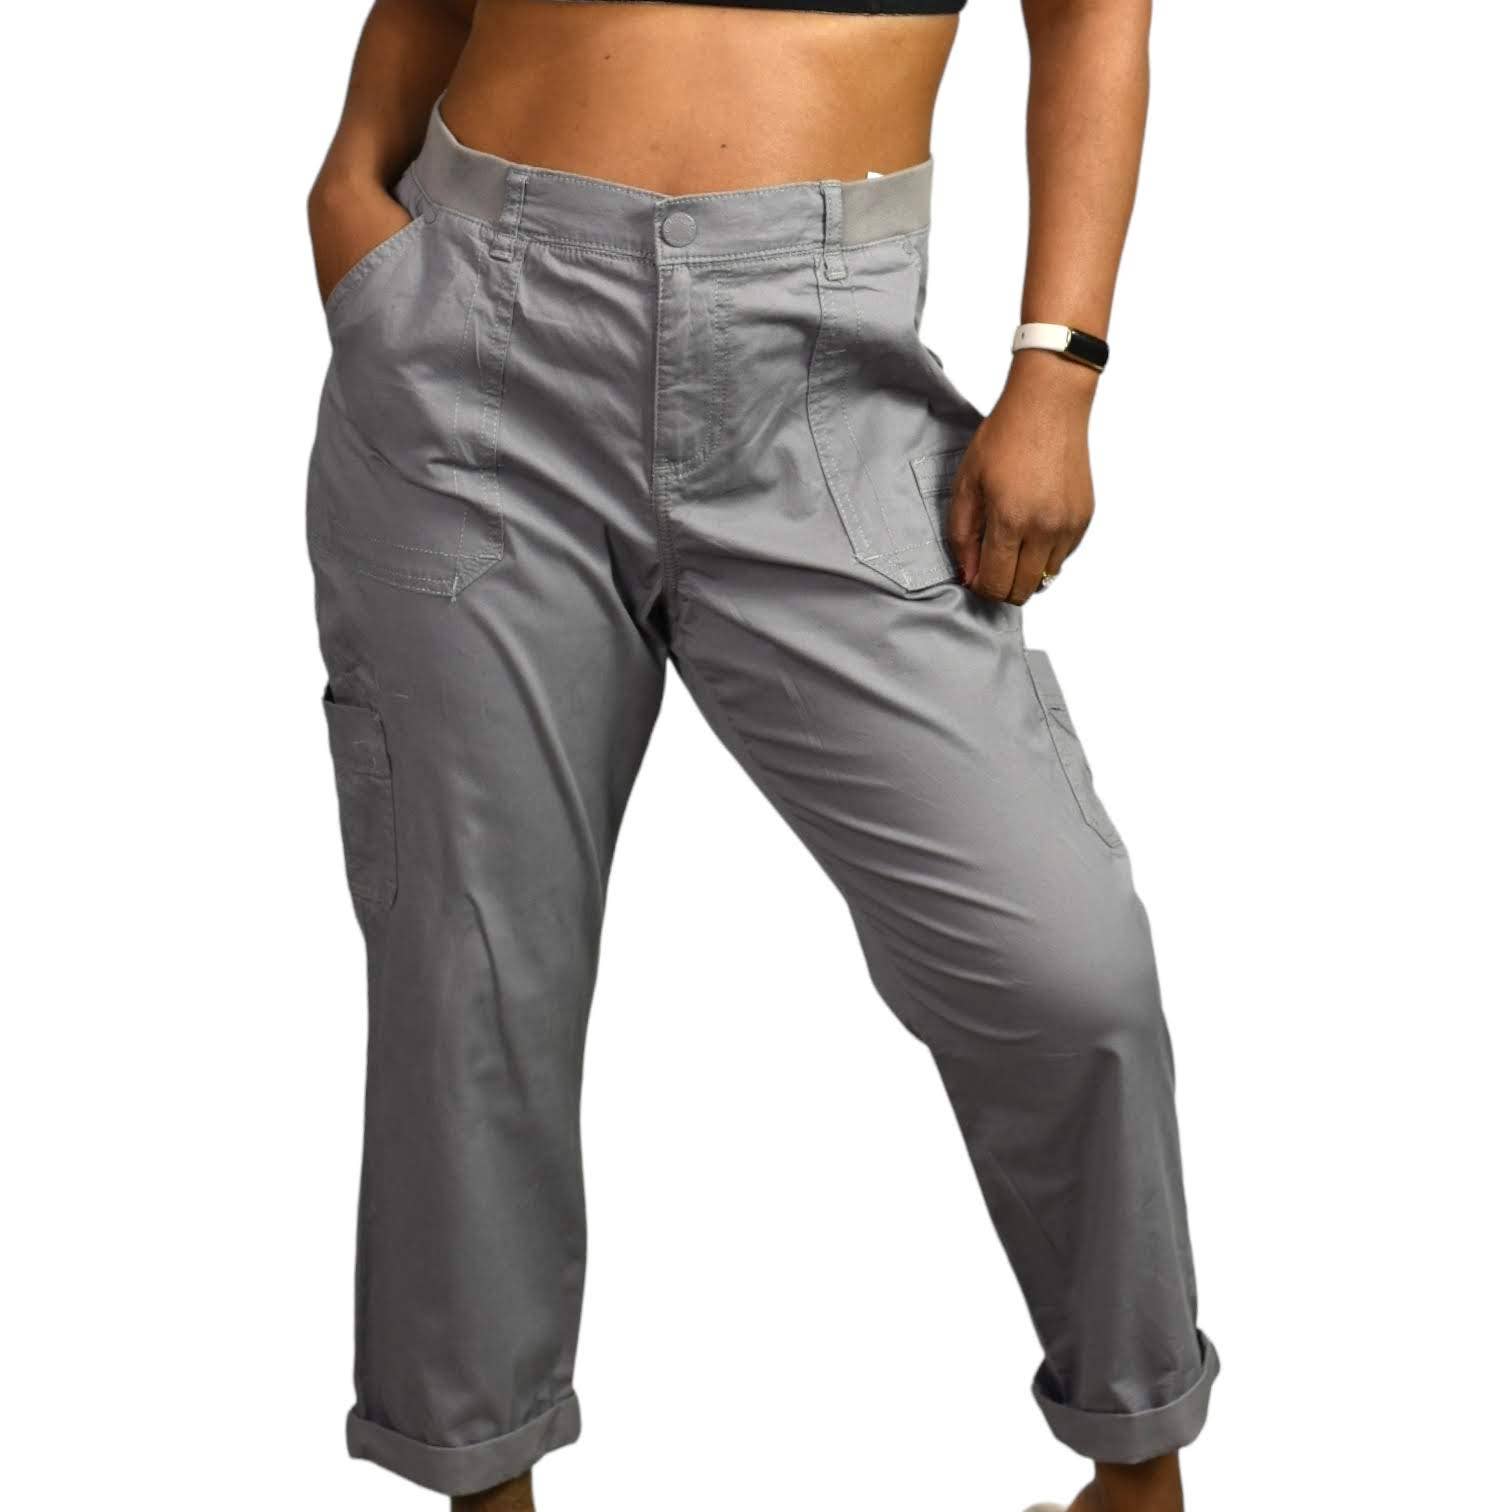 Lee Cargo Pants Relaxed Fit Cropped Cuffed Grey Straight Capri Mid Rise Size 12